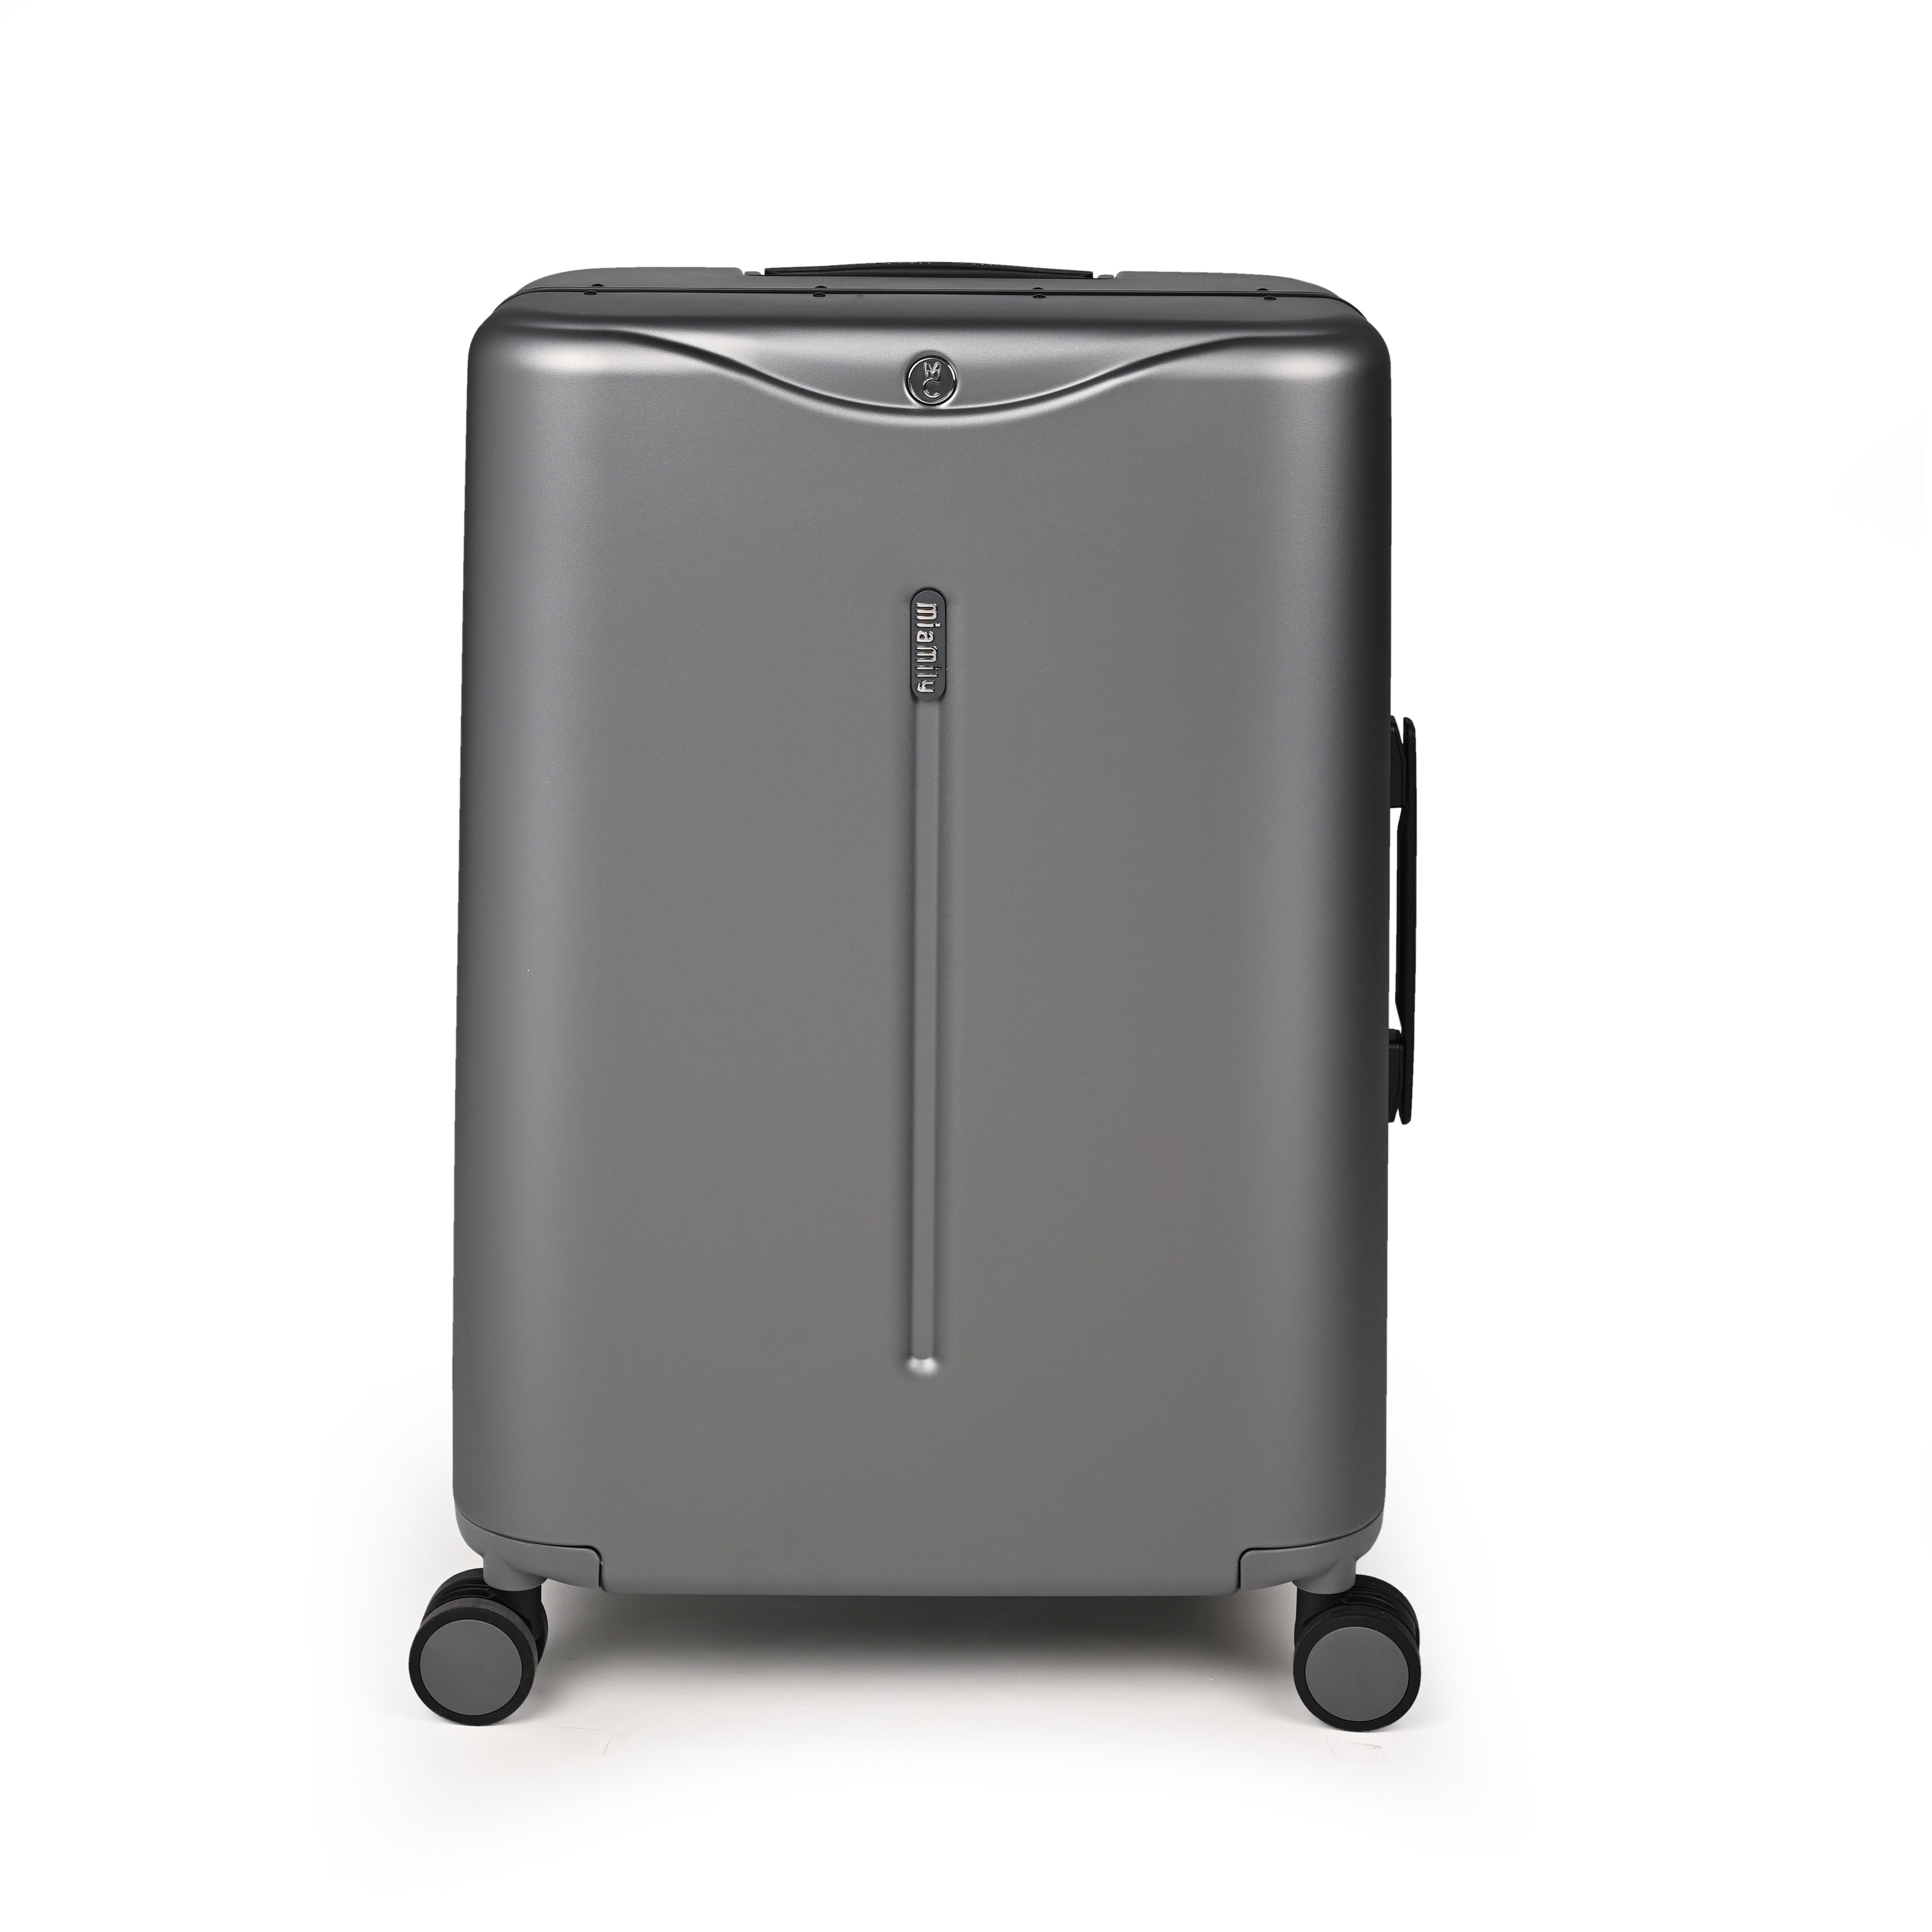 Miamily Charcoal Grey Ride on Trolley Check-In Luggage 24 inches